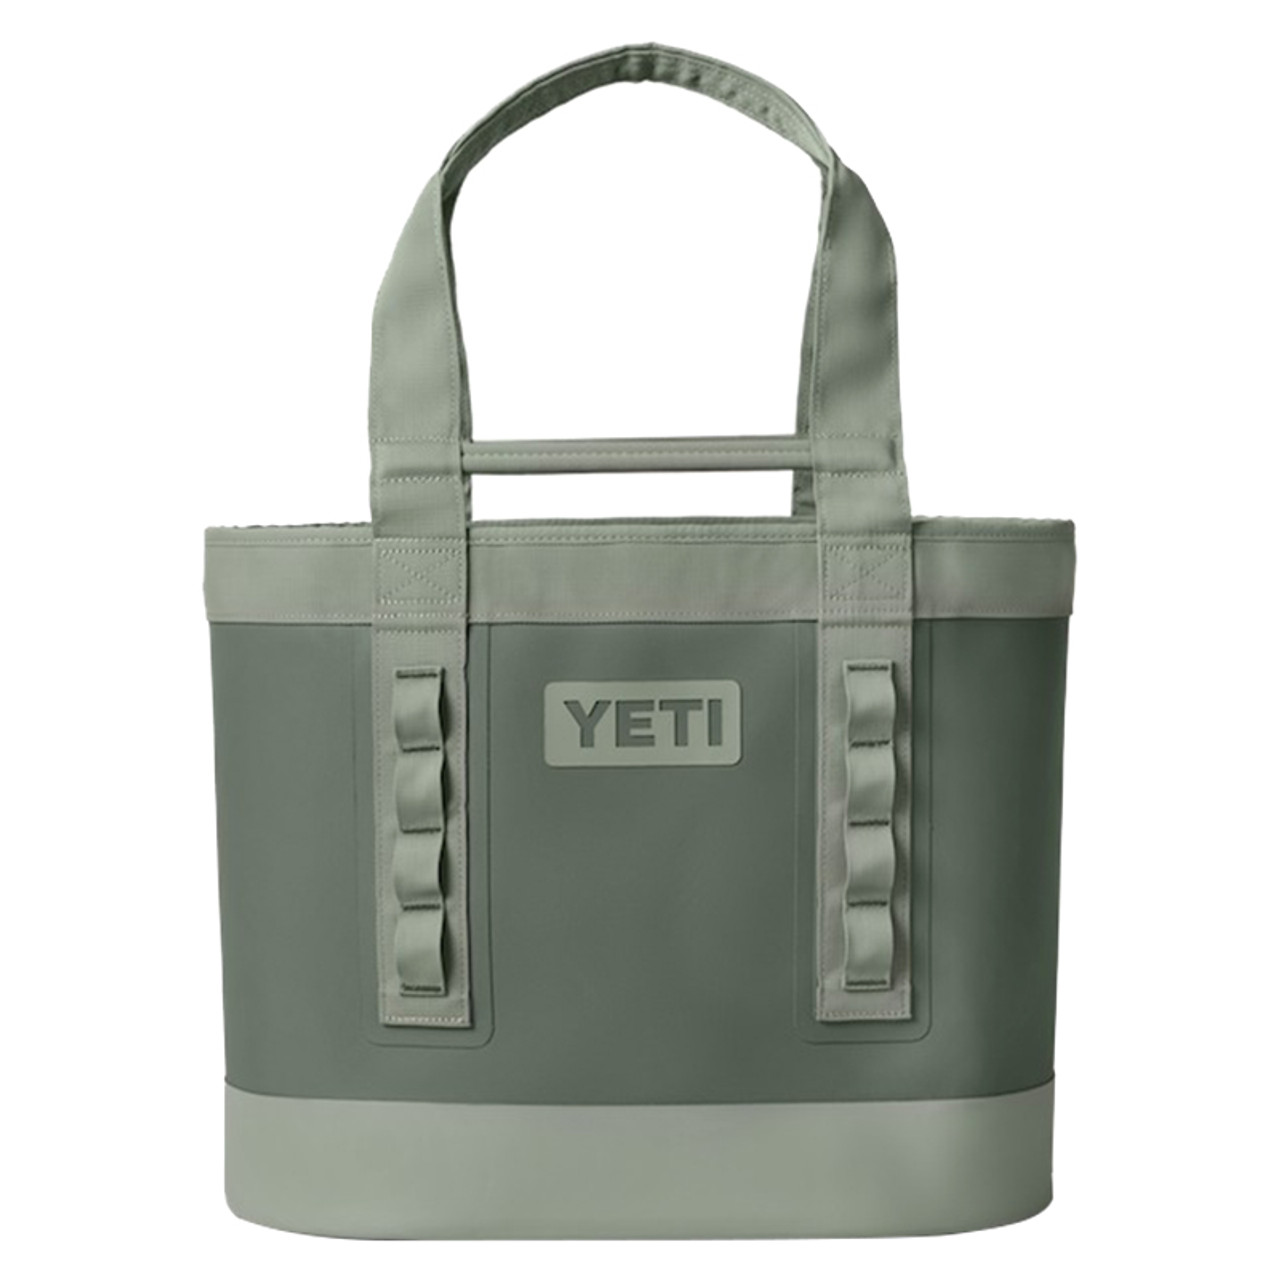 YETI Camino 35 Carryall Outdoor Tote Bag In Camp Green